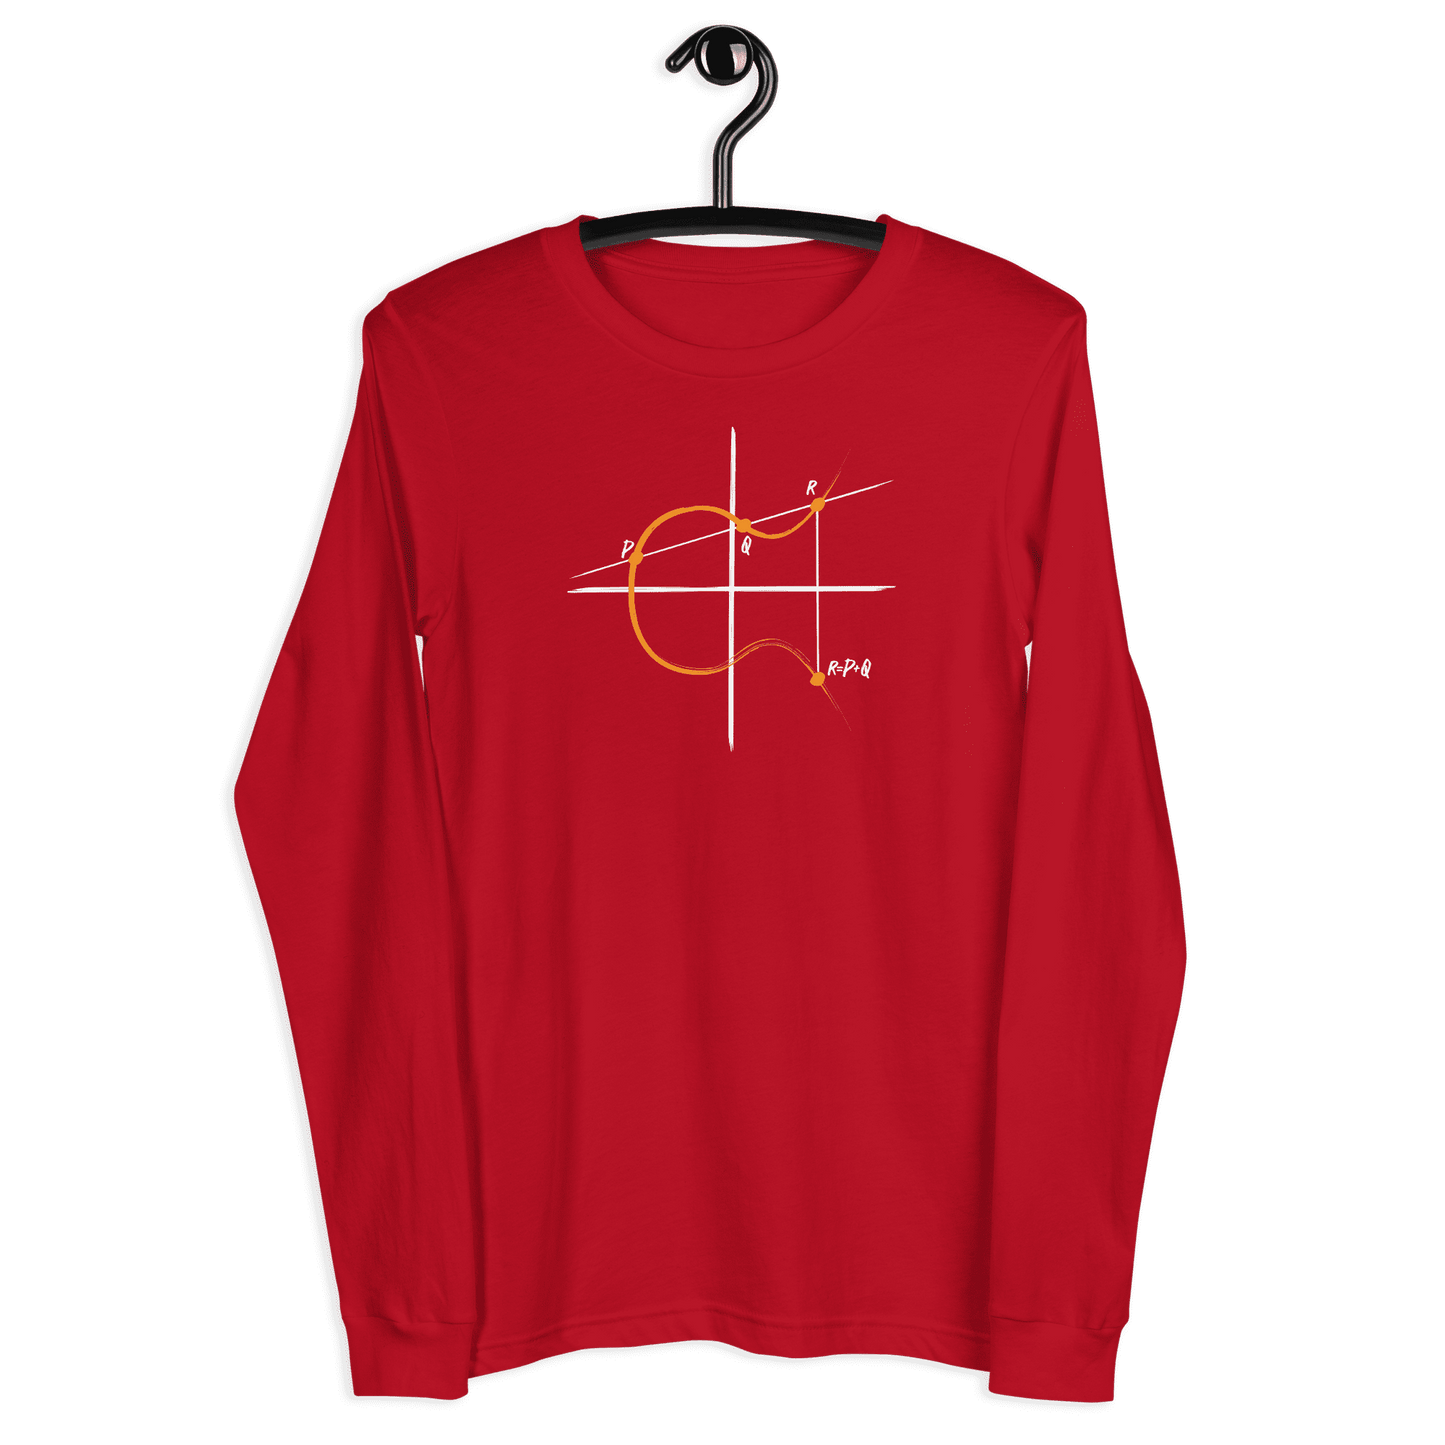 Front view of a red bitcoin long sleeve tee.